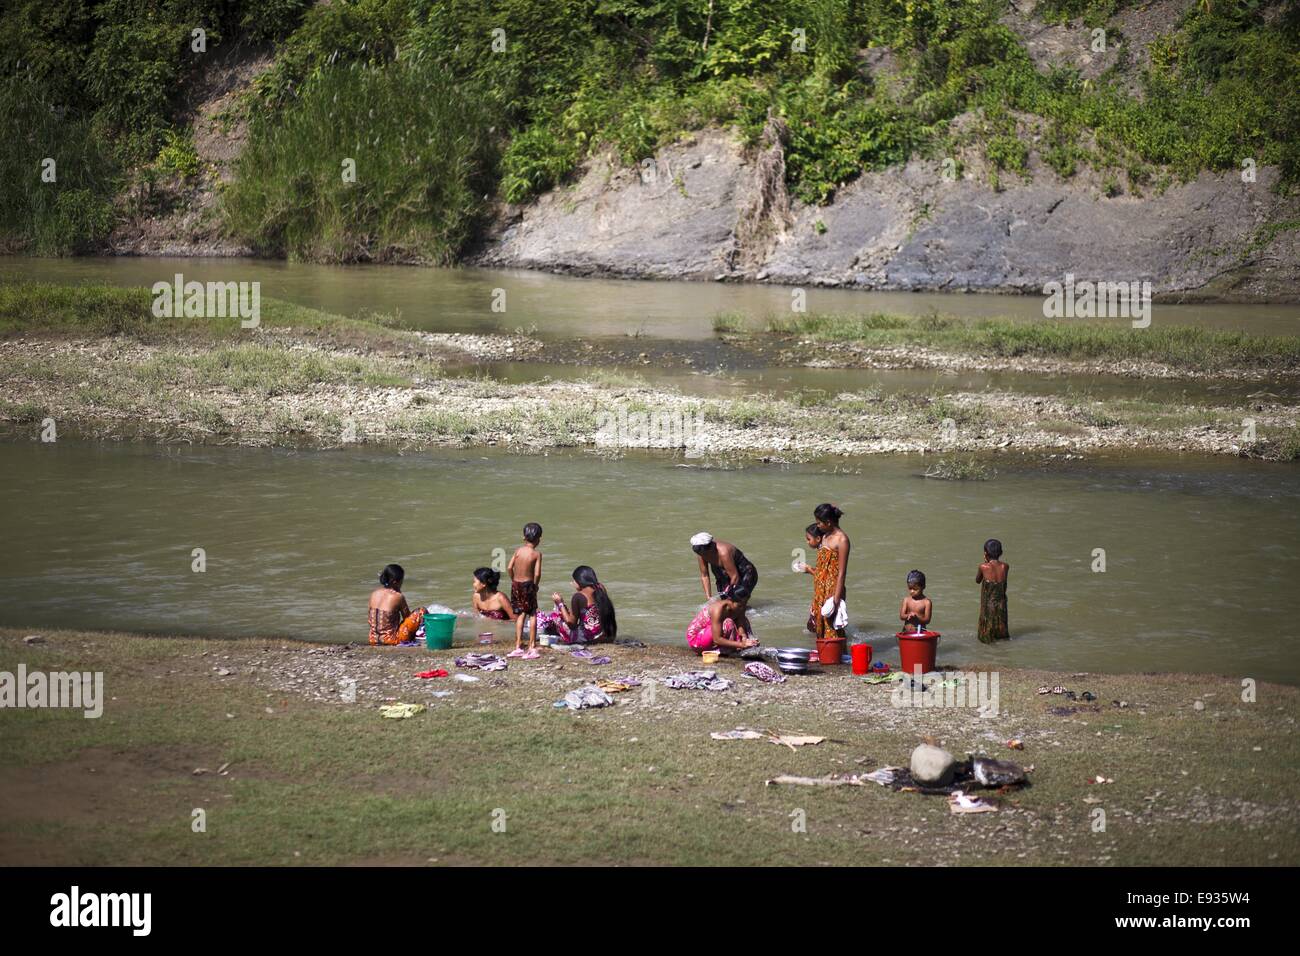 Oct. 10, 2014 - October 10, 2014 - Bandarban, Bangladesh - Marma community people take bathing Sangu river in Bandarban, Bangladesh. Bandarban is a district in South-Eastern Bangladesh, and a part of the Chittagong Division. It is one of the three districts that make up the Chittagong Hill Tracts, the others being Rangamati District and Khagrachhari District. Bandarban is regarded as one of the most attractive travel destinations in Bangladesh. Bandarban (meaning the dam of monkeys), or in Marma or Arakanese language as ''Rwa-daw Mro'' is also known as Arvumi or the Bohmong Circle (of the rest Stock Photo